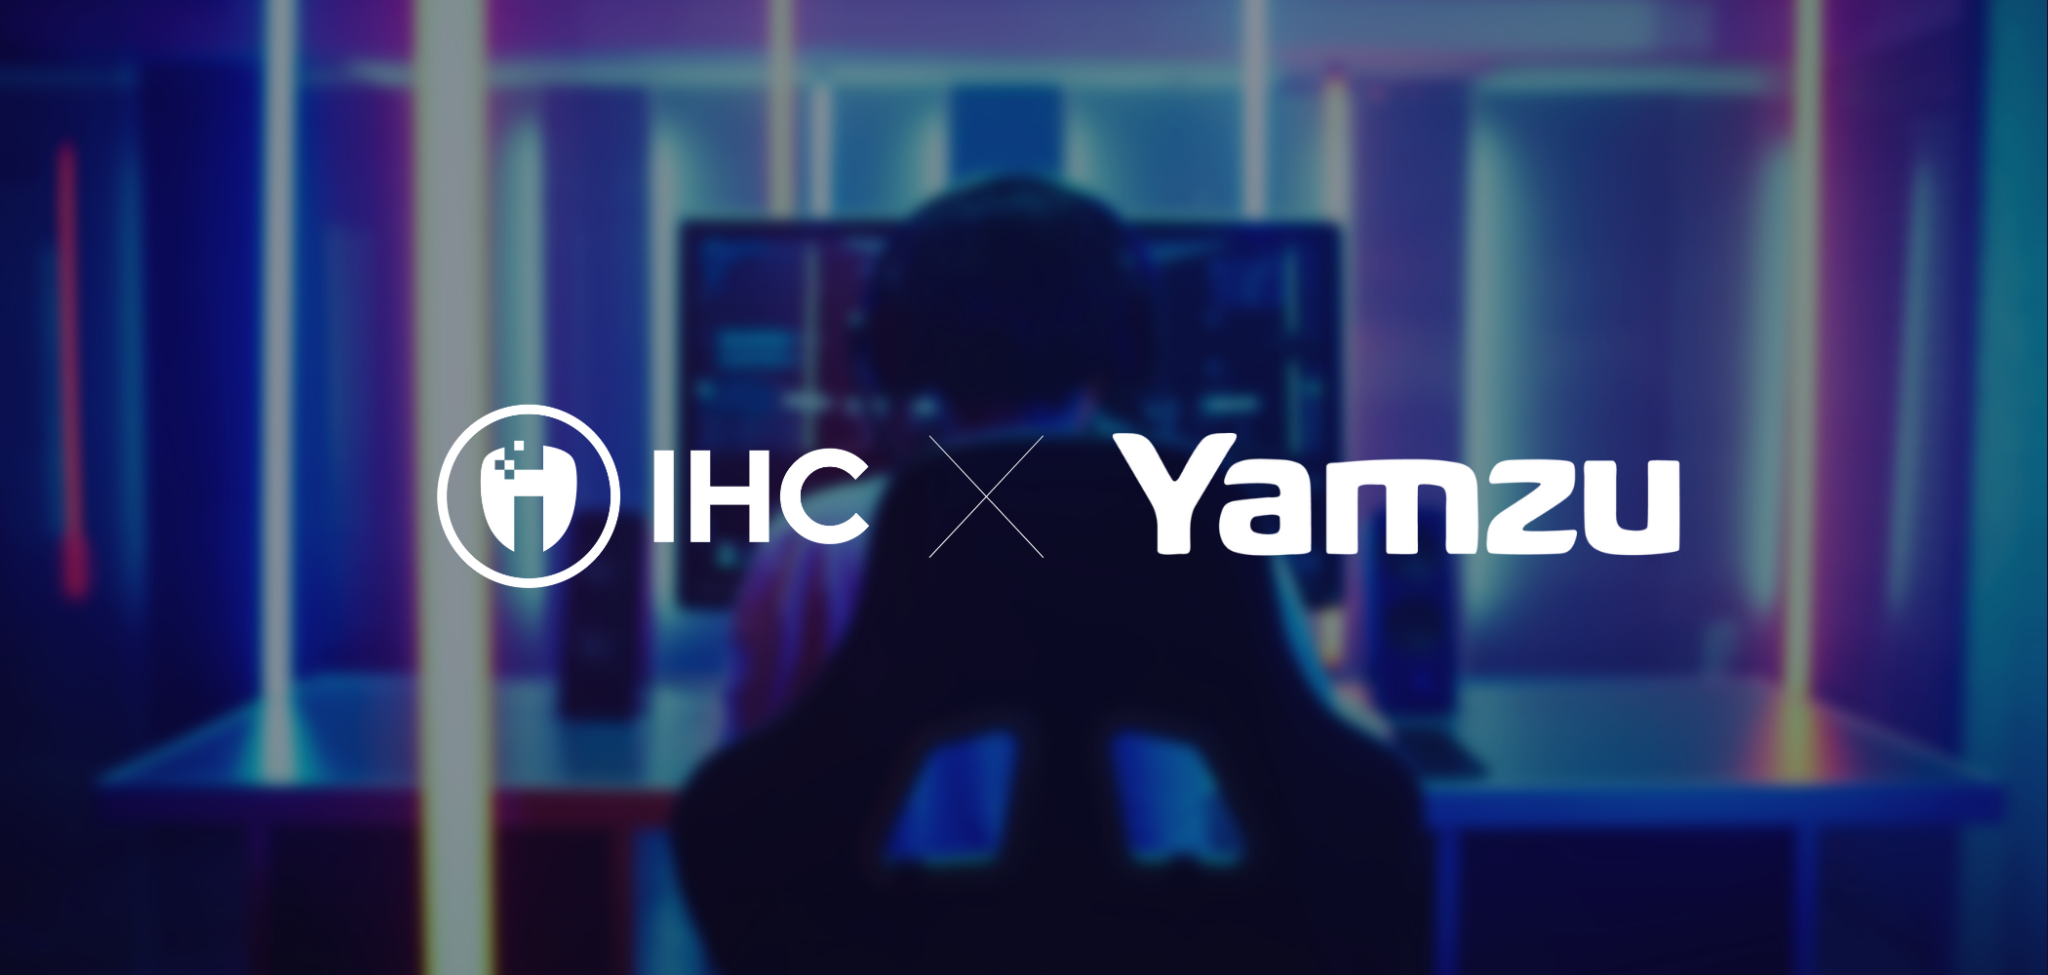 Inflation Hedging Coin (IHC) and Yamzu team up to do battle together